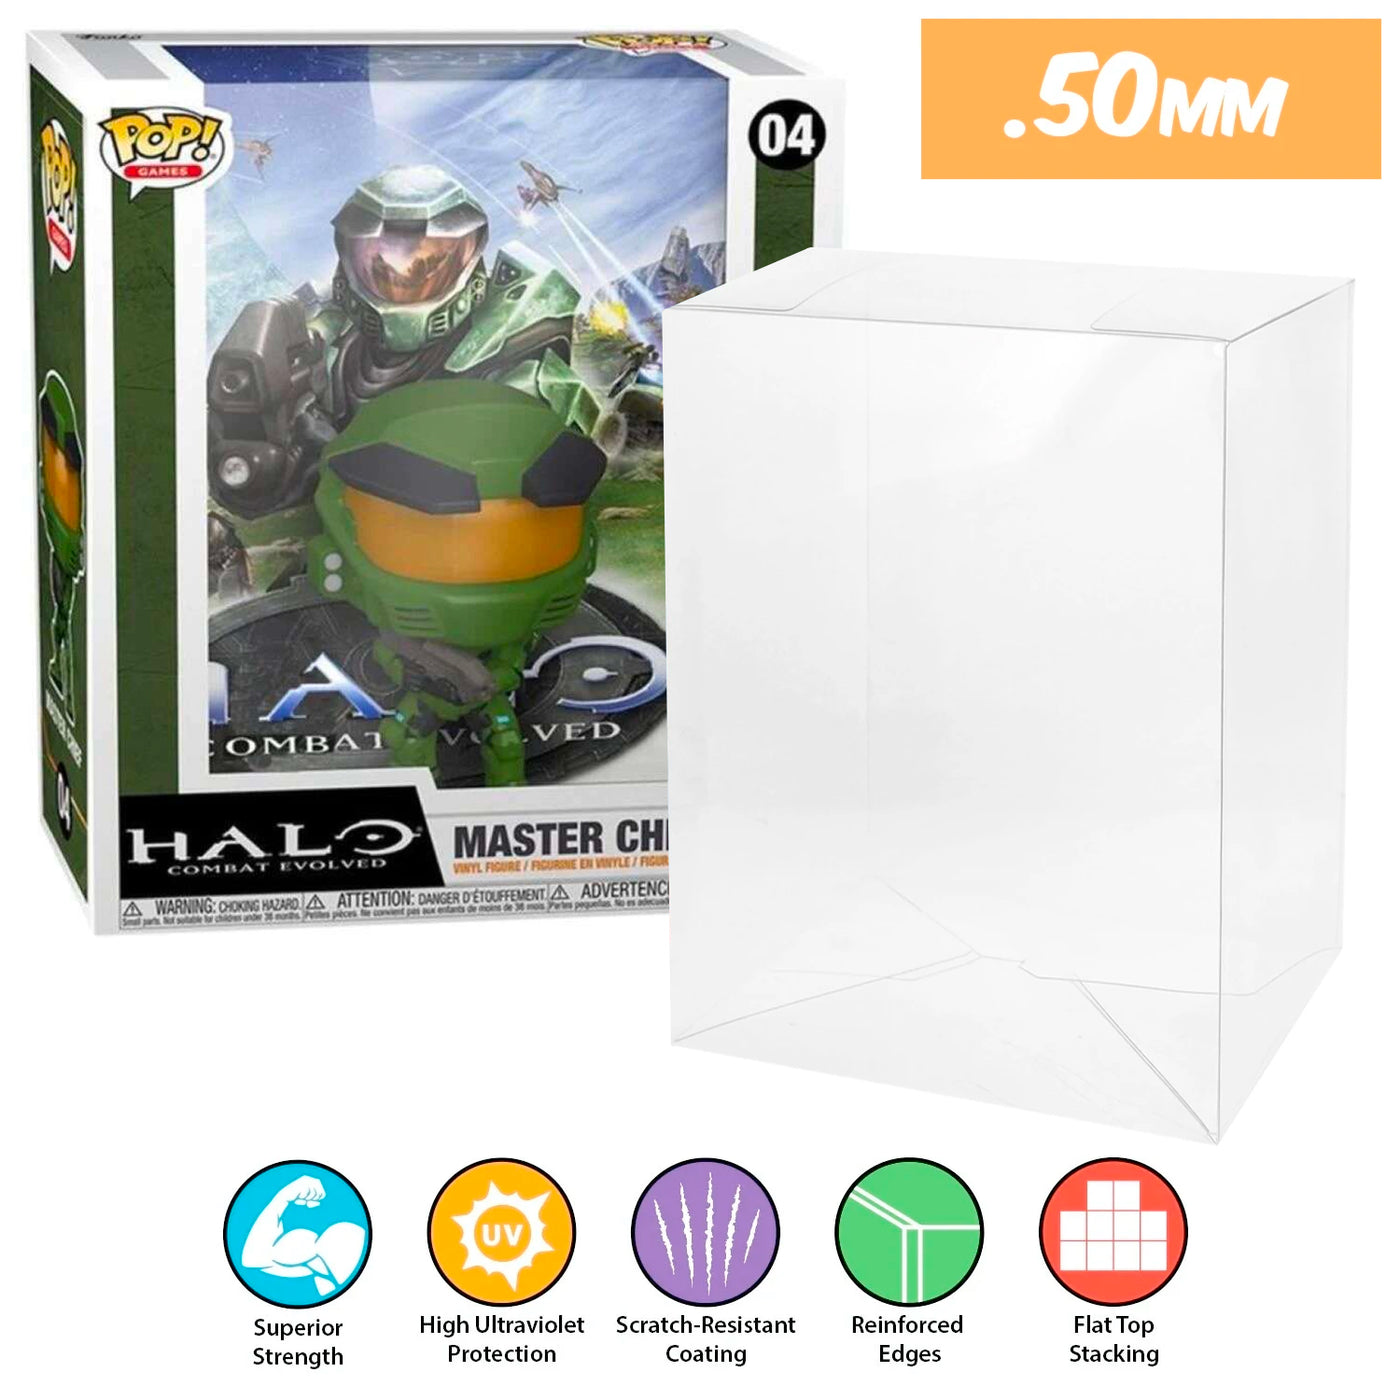 04 halo master chief pop game covers best funko pop protectors thick strong uv scratch flat top stack vinyl display geek plastic shield vaulted eco armor fits collect protect display case kollector protector